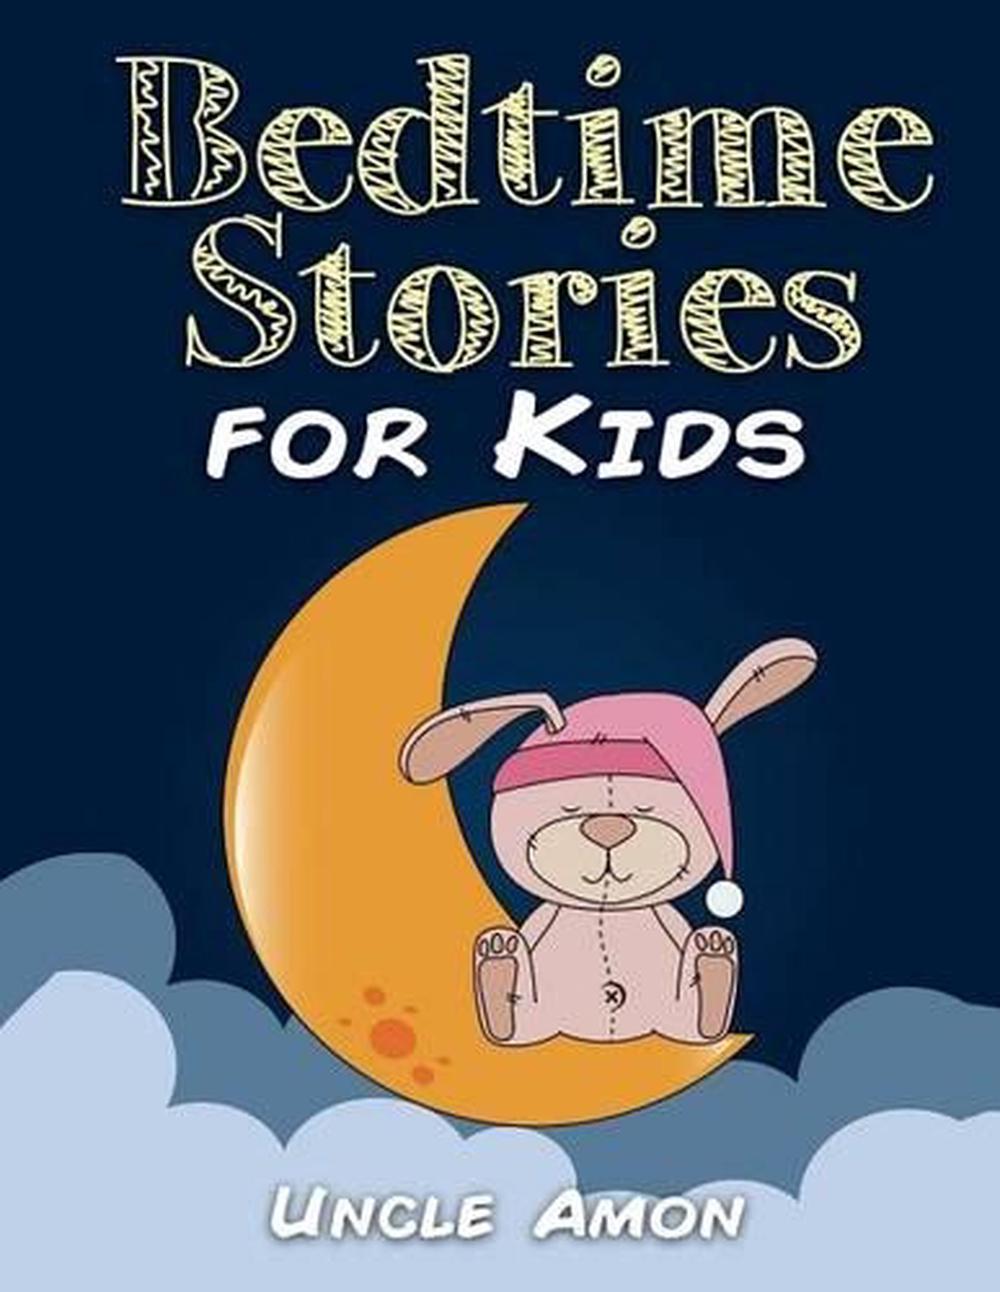 Bedtime Stories For Kids Short Stories For Kids Fun Activities And